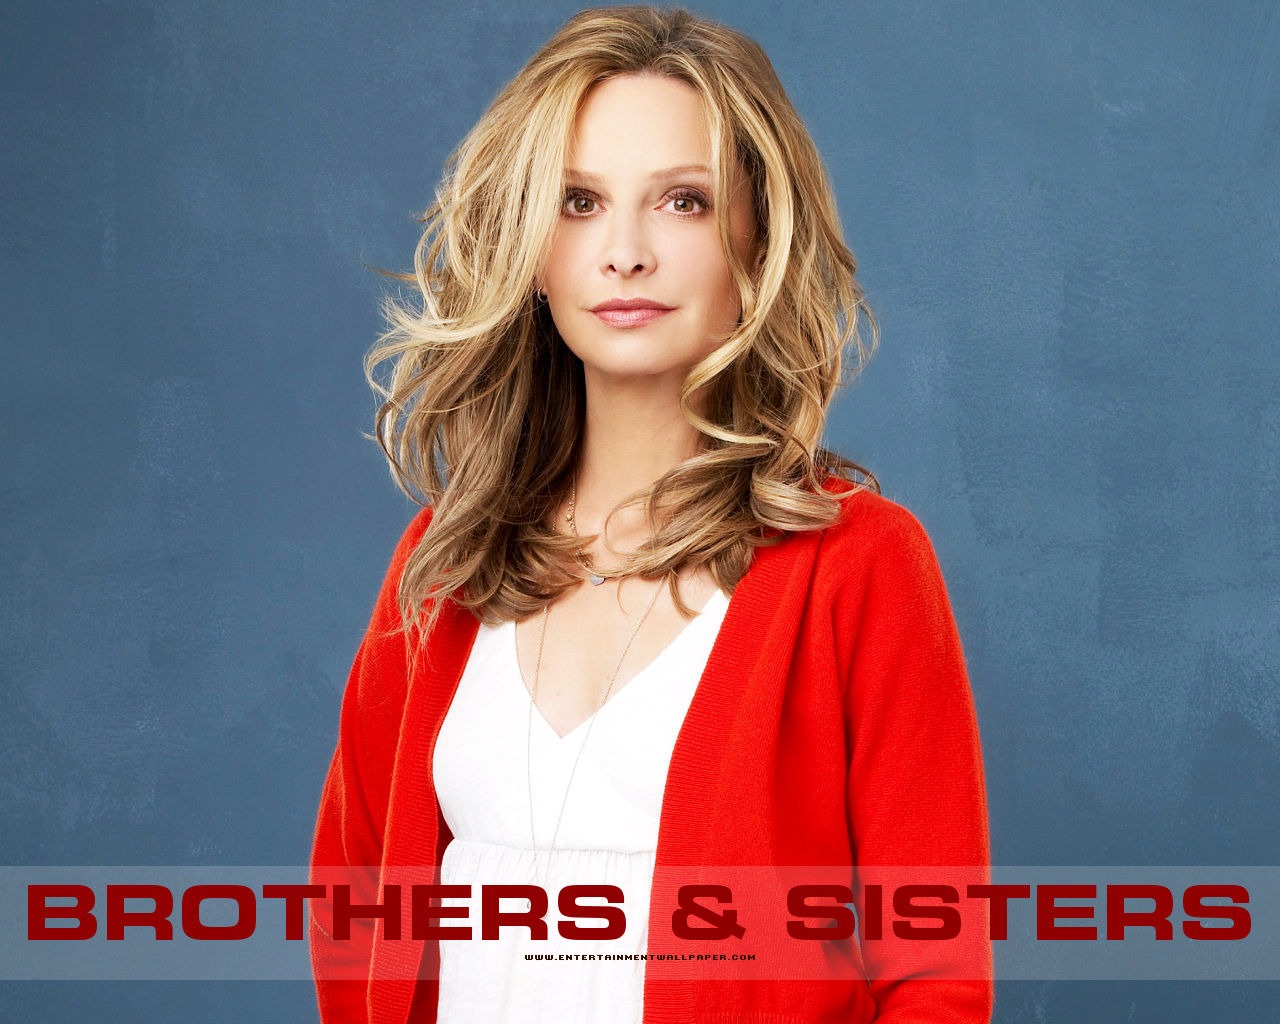 Brothers & Sisters wallpaper #10 - 1280x1024